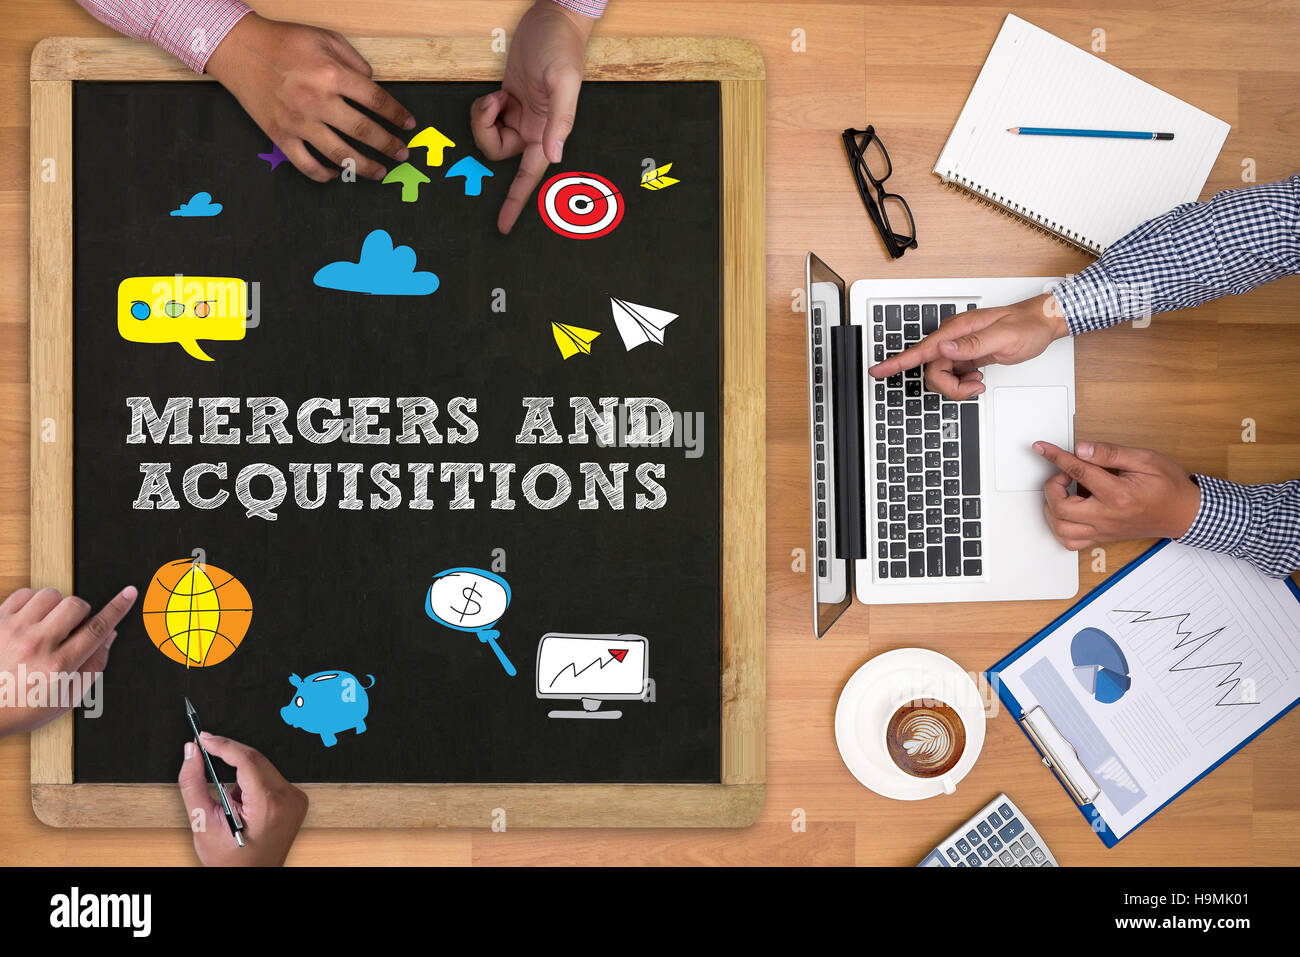 M&A (MERGERS AND ACQUISITIONS) Stock Photo